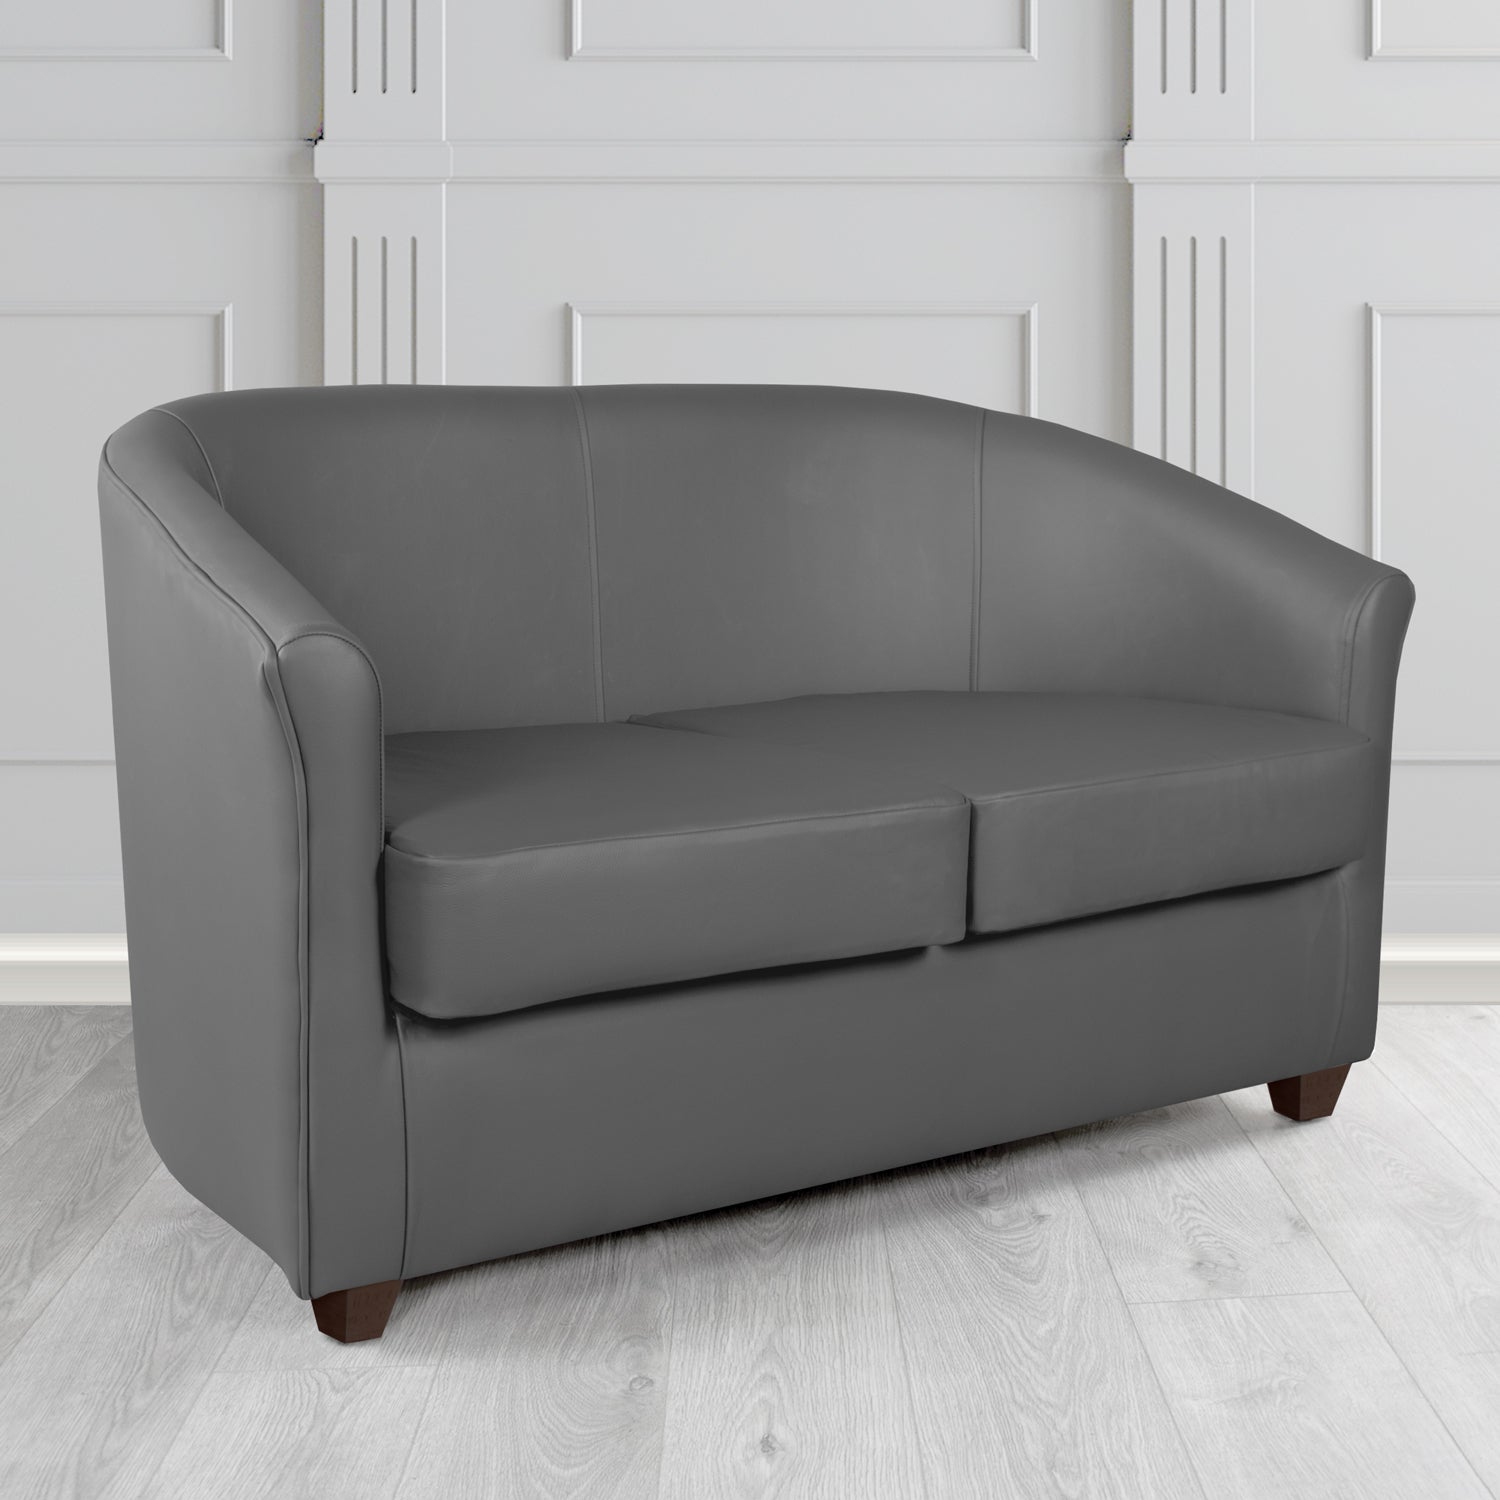 Cannes 2 Seater Tub Sofa in Just Colour Gunmetal Grey Crib 5 Faux Leather - The Tub Chair Shop